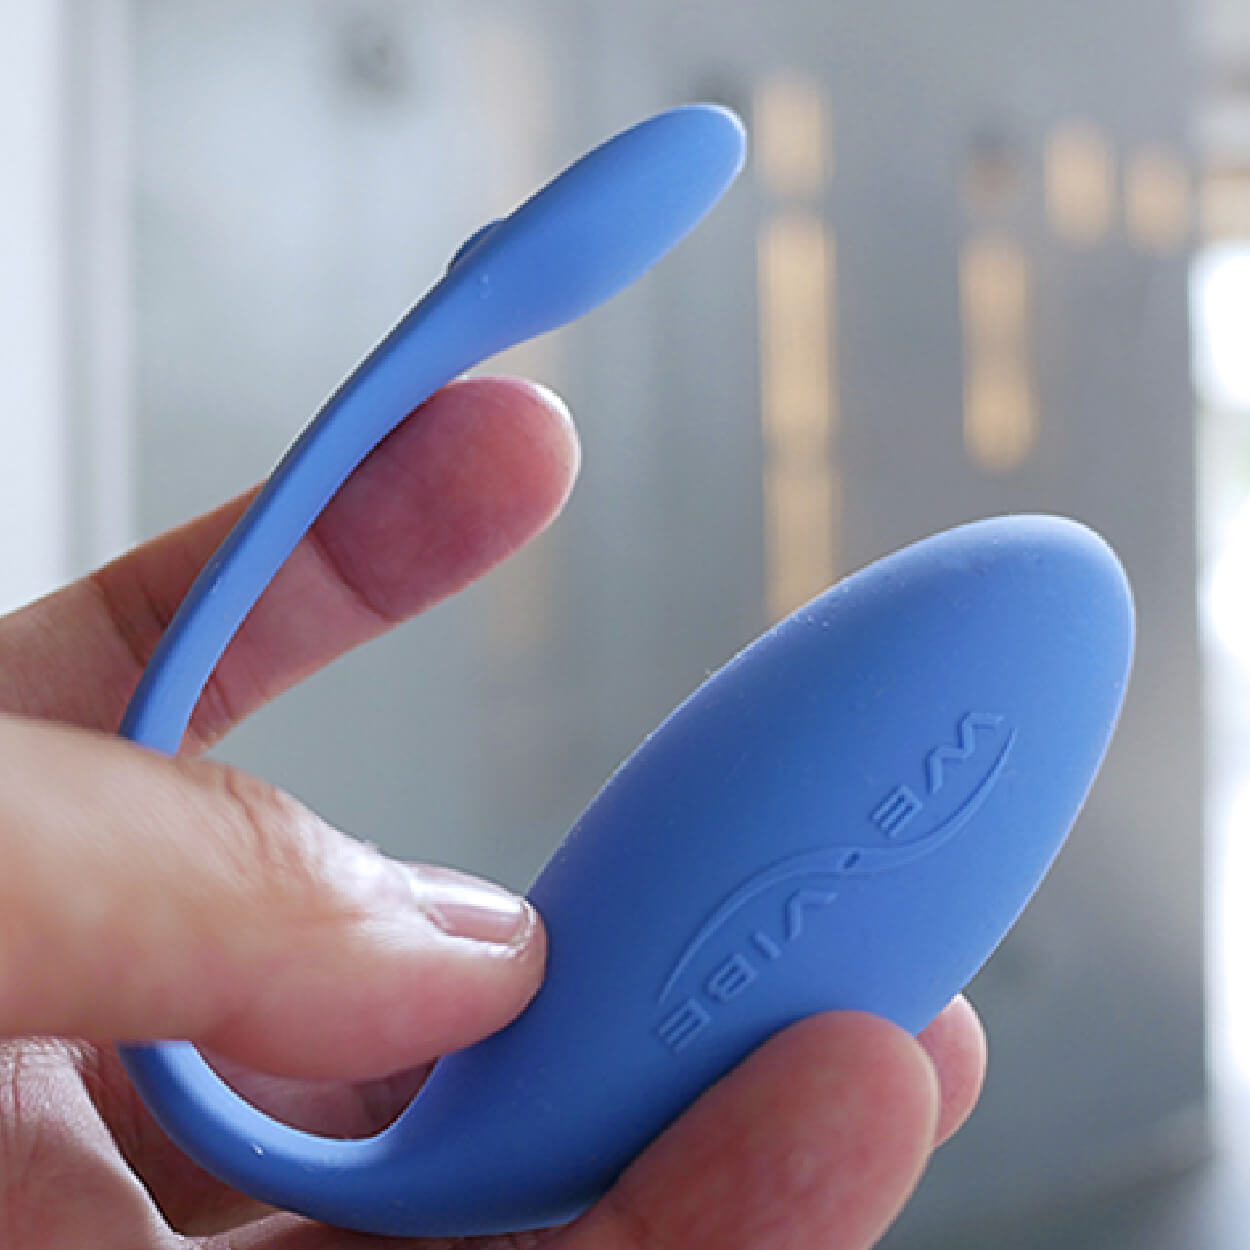 The G-spot stimulator for incredible pleasure Jive by We-Vibe - Product image